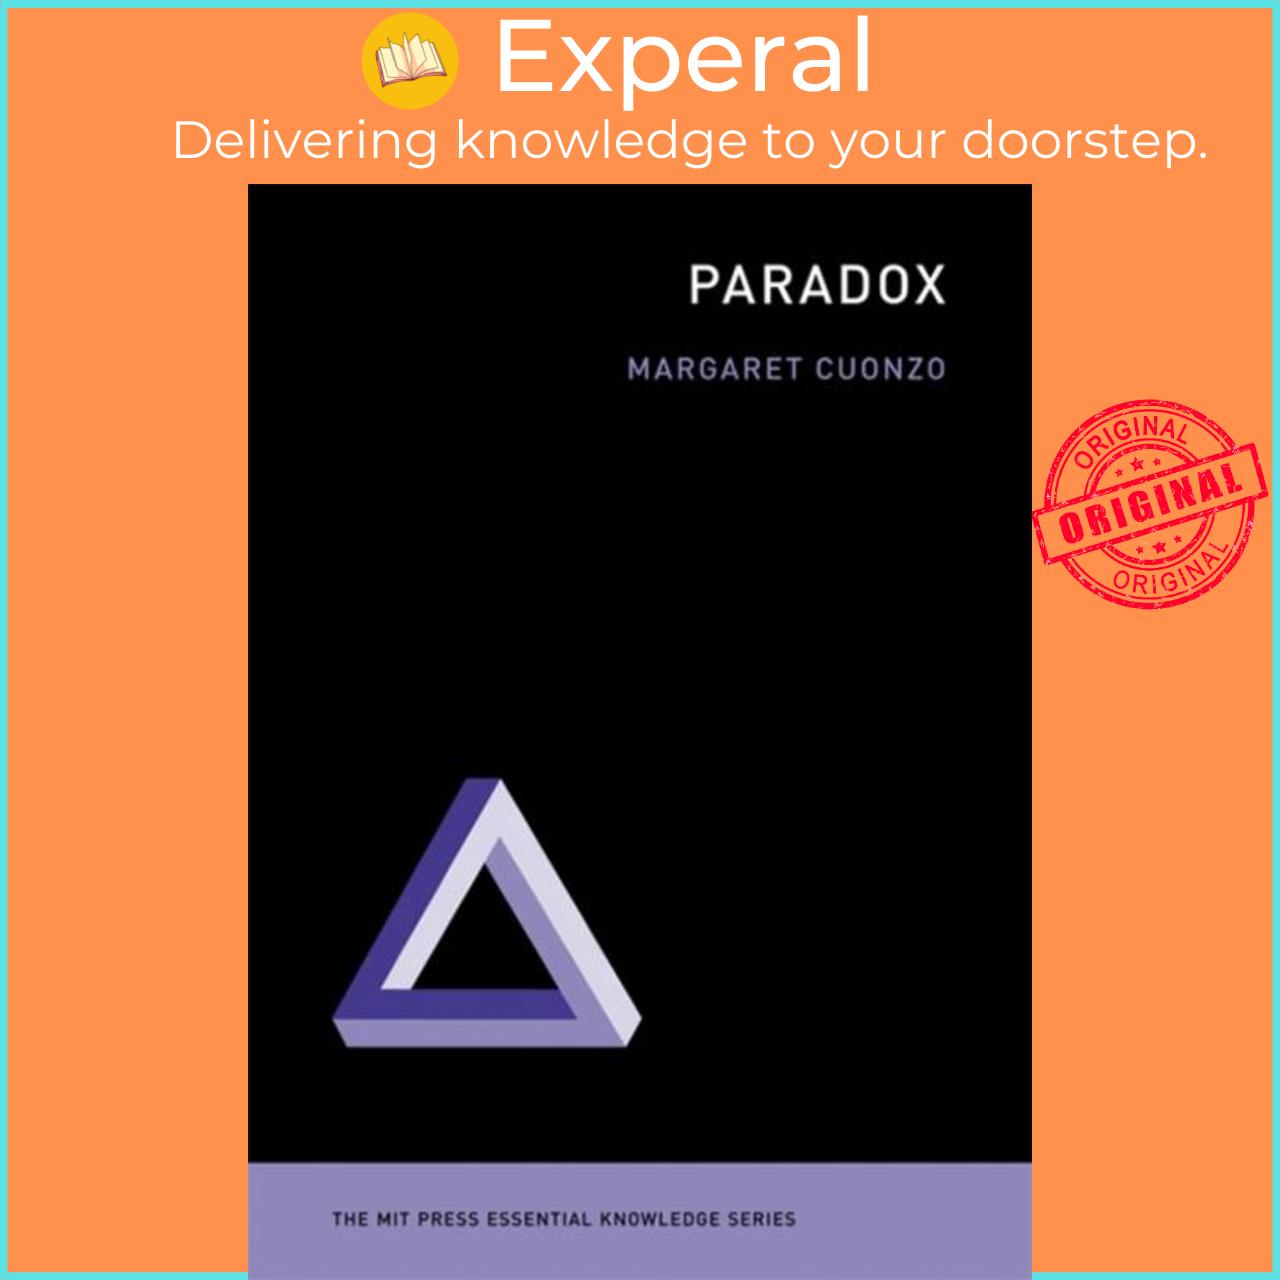 Sách - Paradox by Margaret Cuonzo (UK edition, paperback)